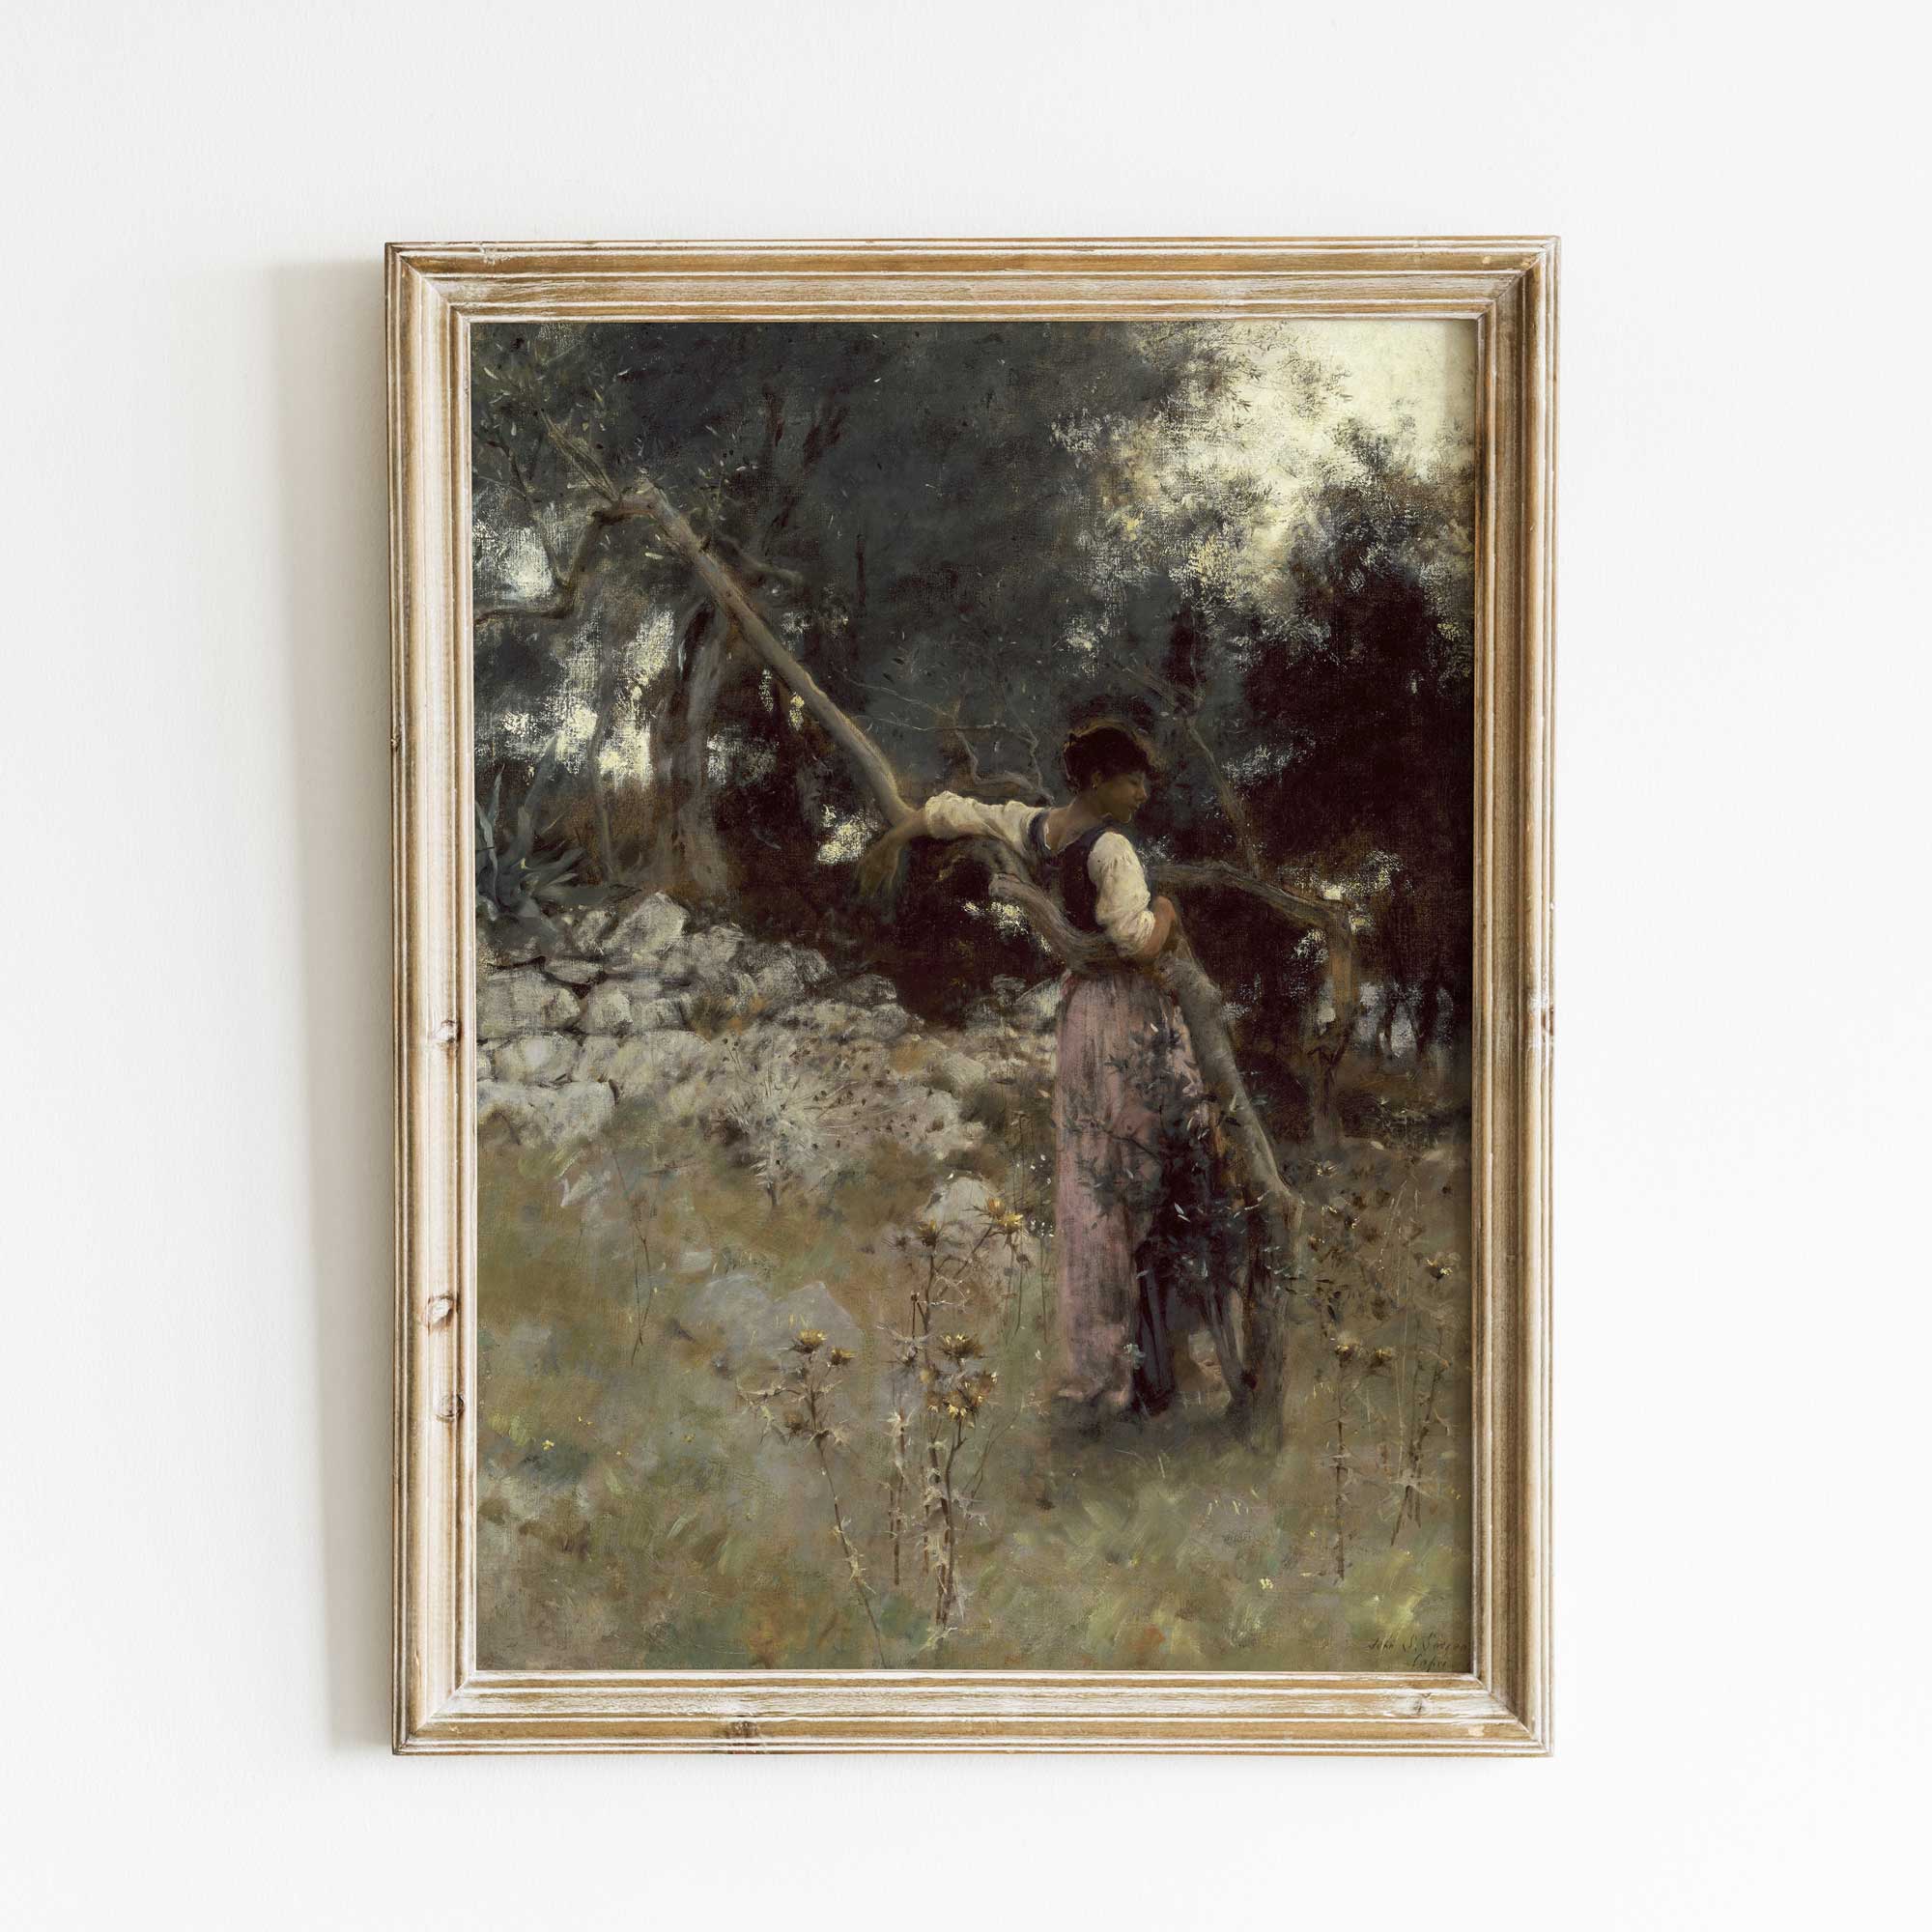 Capriote in the Olive Grove - Vintage Portrait Print